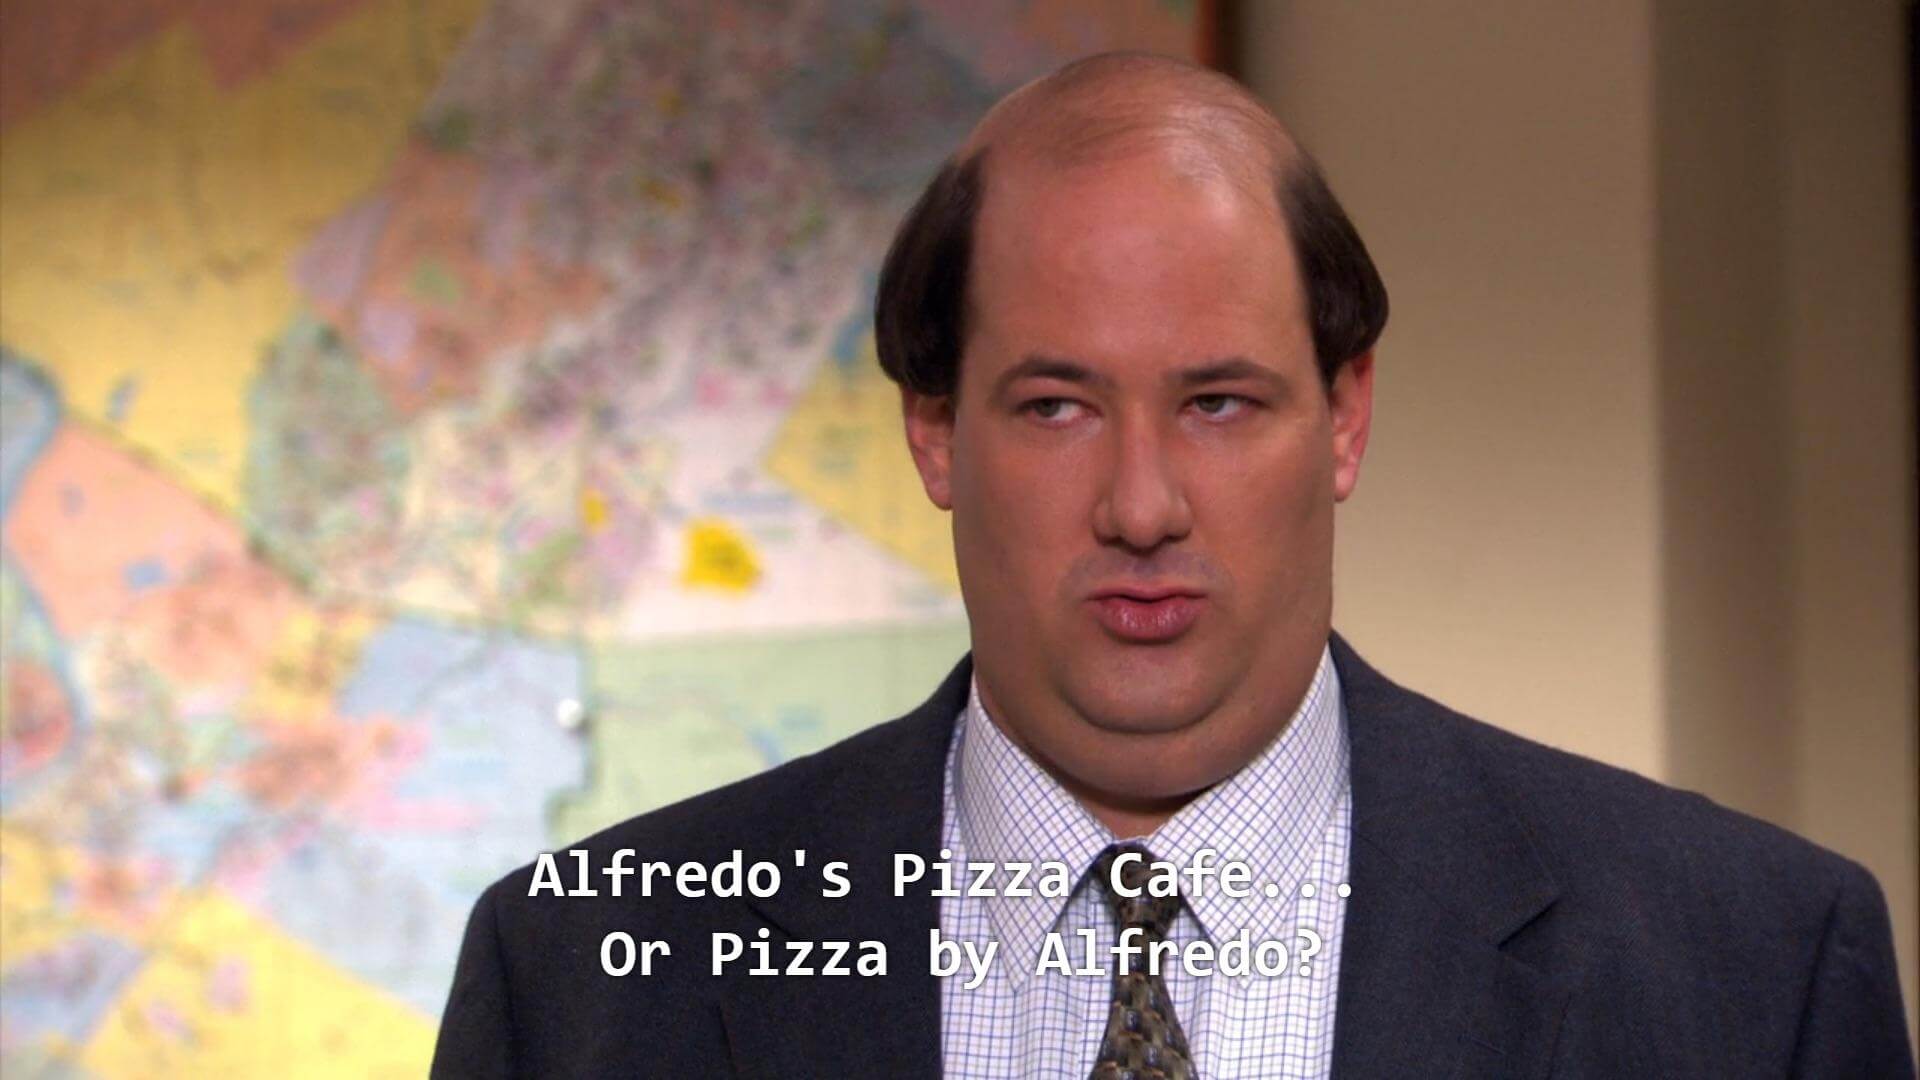 kevin asking about the pizza place